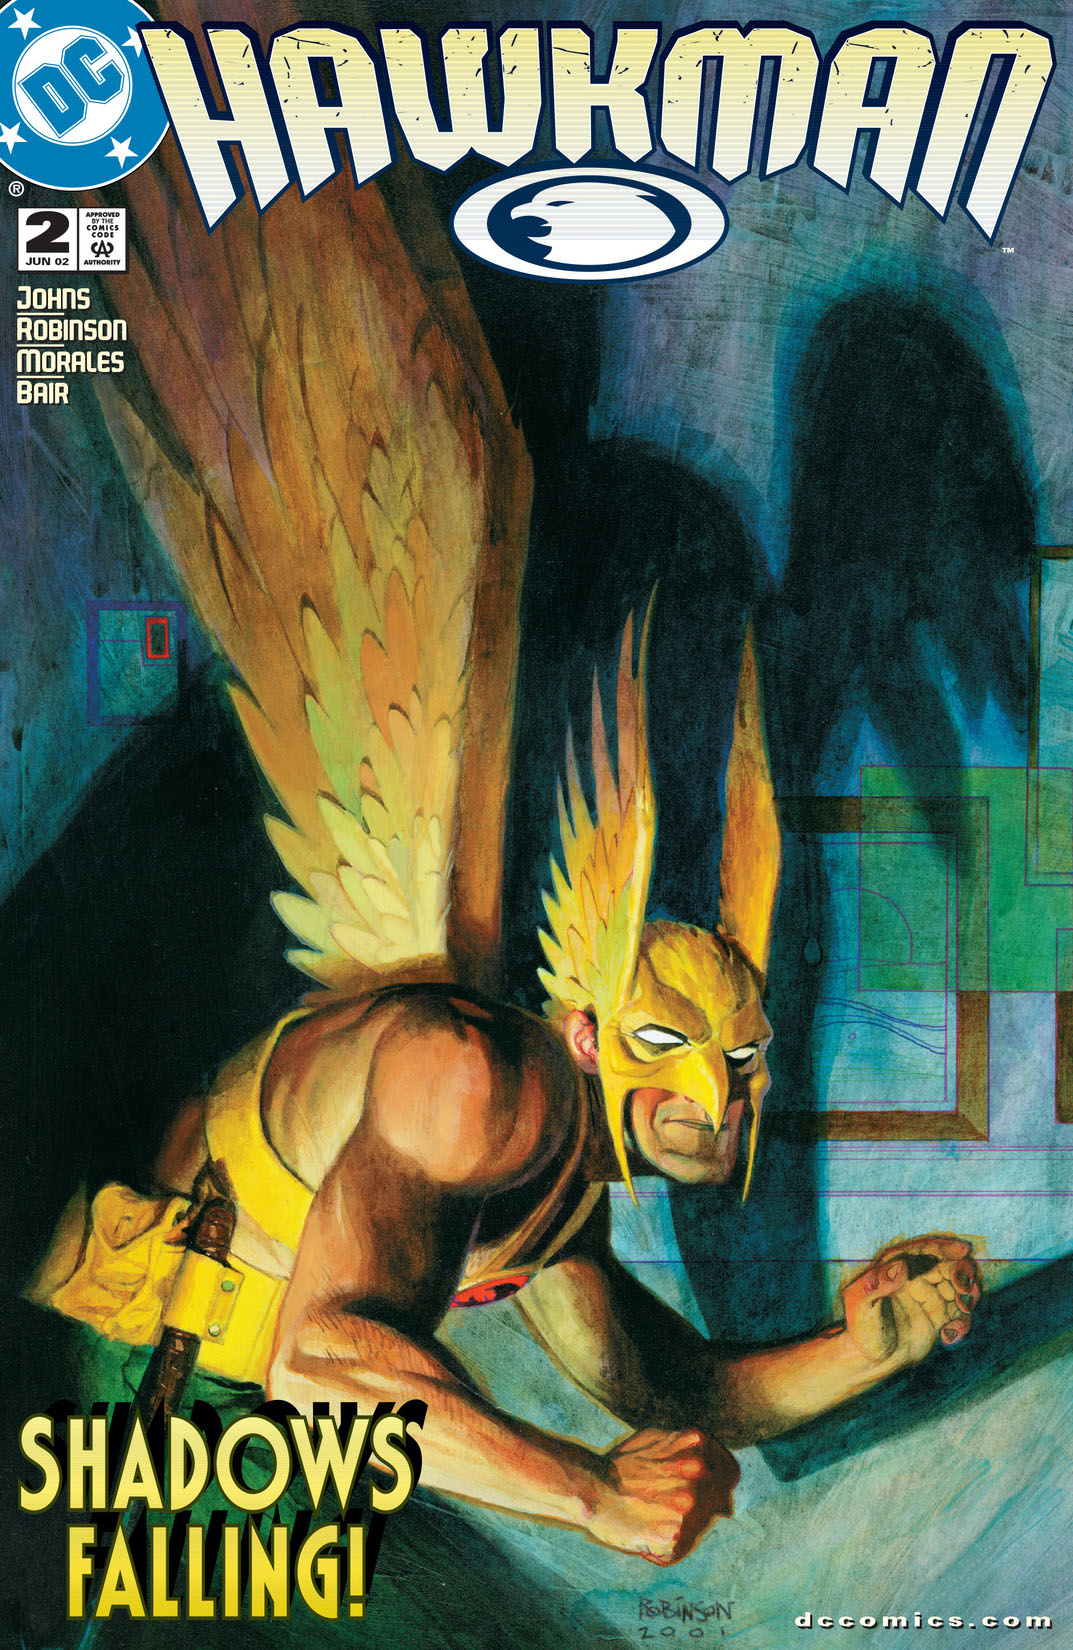 Hawkman (2002-) #2 preview images